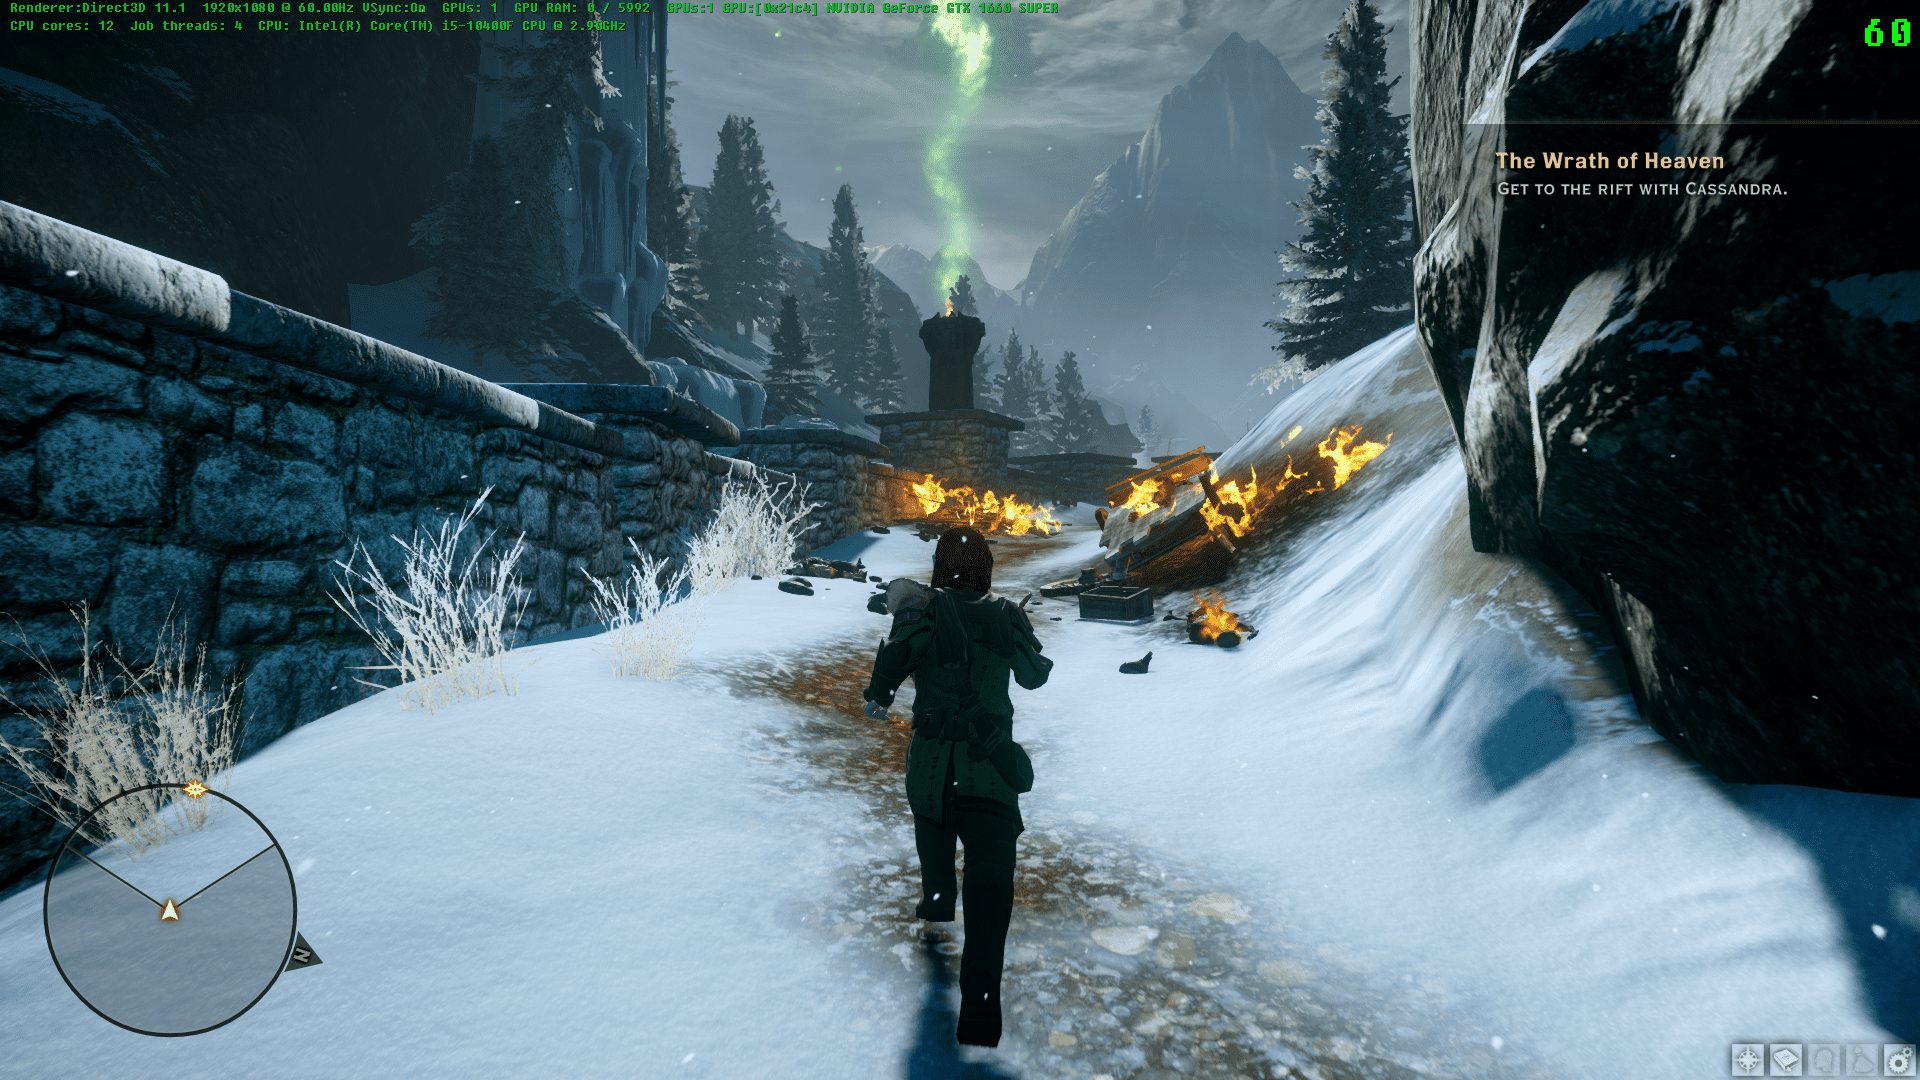 Dragon Age Inquisition Console Commands – Cheat Codes and More in 2022